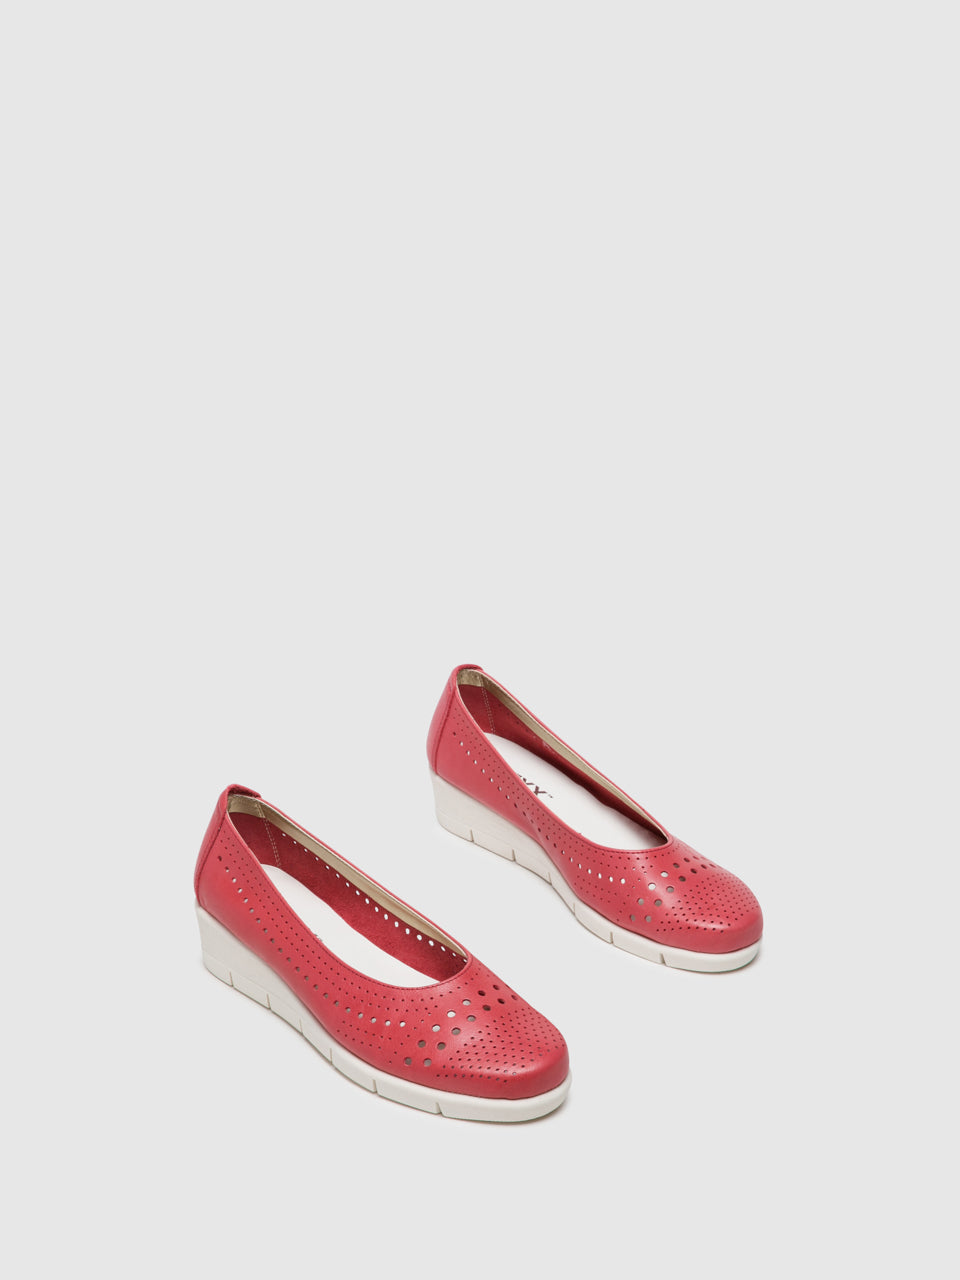 The Flexx Red Wedge Shoes